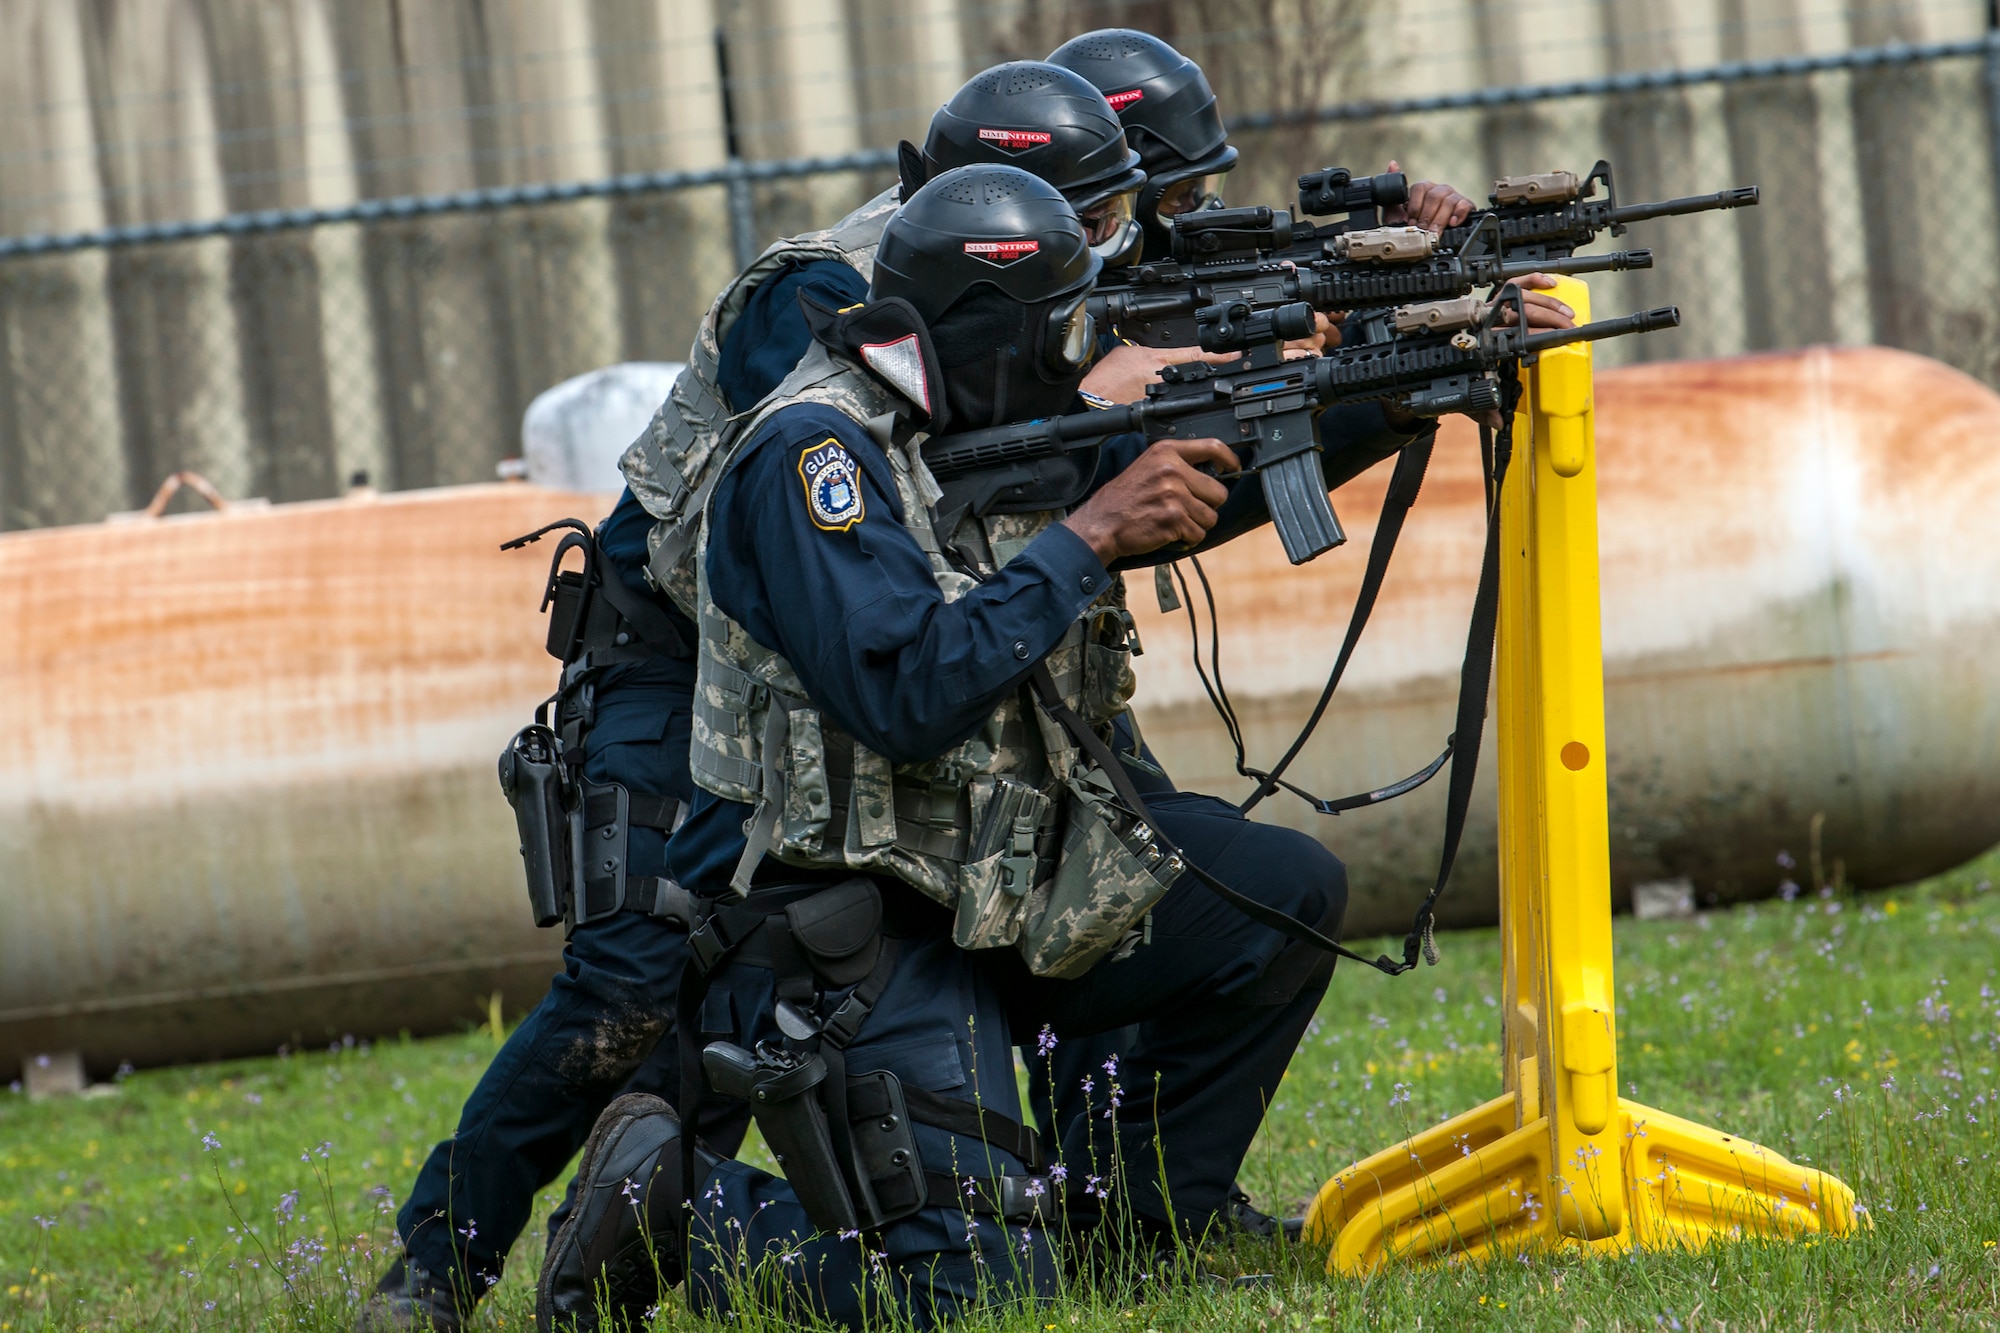 Personnel from the 23d Security Forces Squadron prepare to fire M4 carbines, Feb. 22, 2018, at Moody Air Force Base, Ga.  The Shoot, move, communicate training event is designed to test participants on their ability to move from barricade to barricade as a team. To be successful, one member provided covering fire while others advanced on the enemy, then retreated from the scenario while they maintained cover fire. Security Forces members could employ these tactics anytime they’re under enemy fire.
(U.S. Air Force photo by Airman Eugene Oliver)